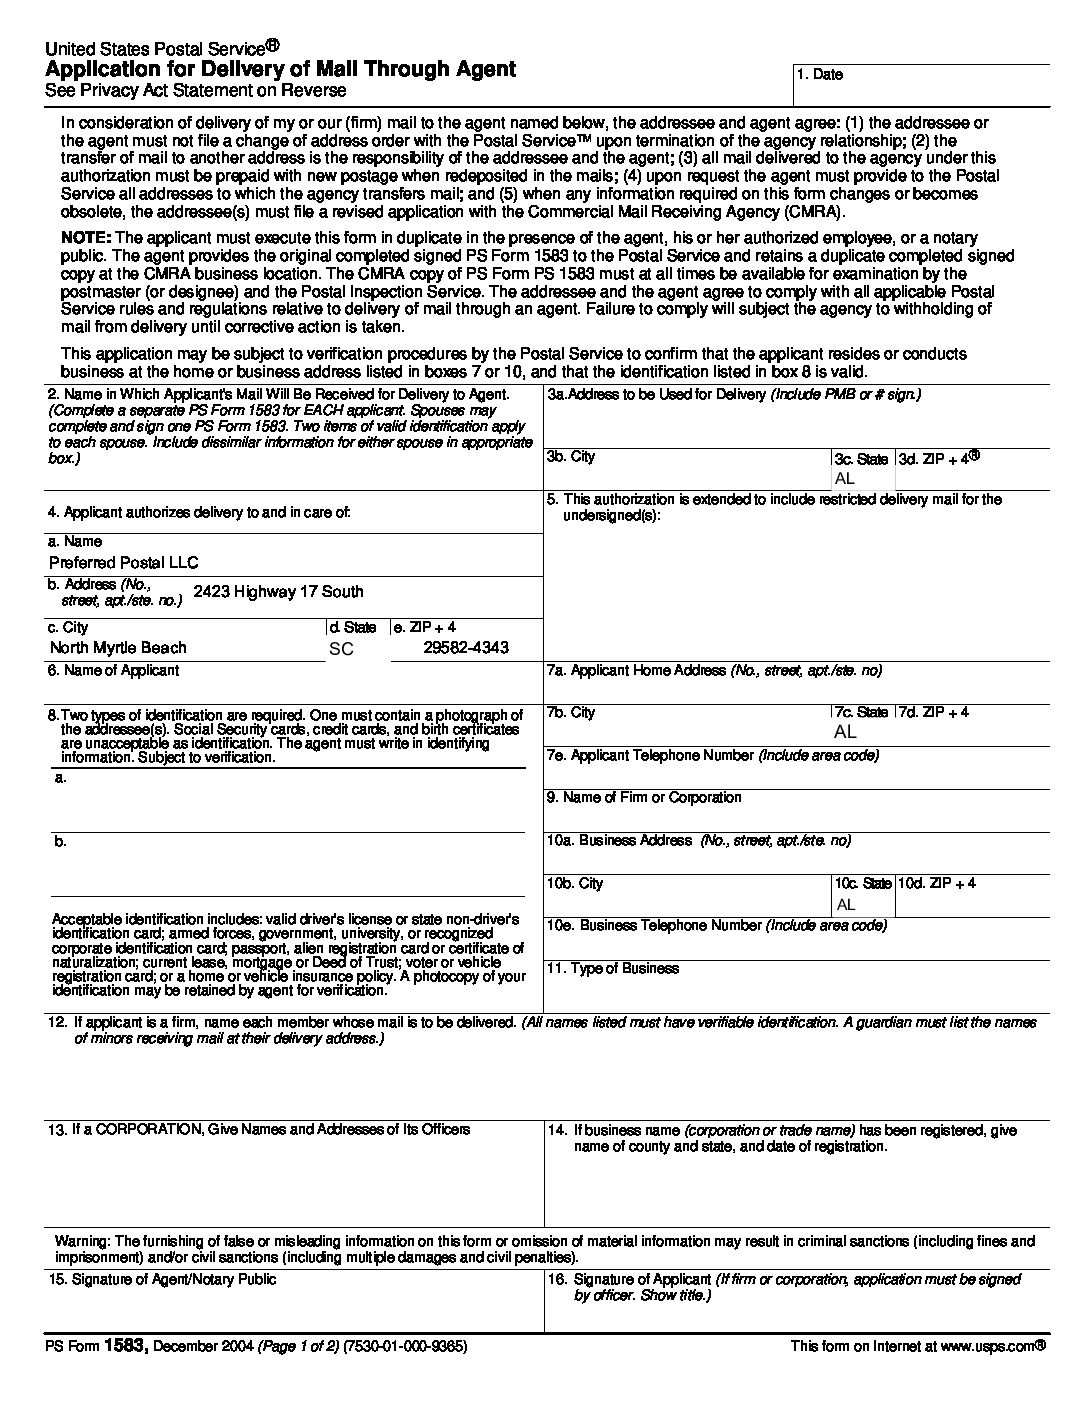 USPS Form 1583: Everything you need to know